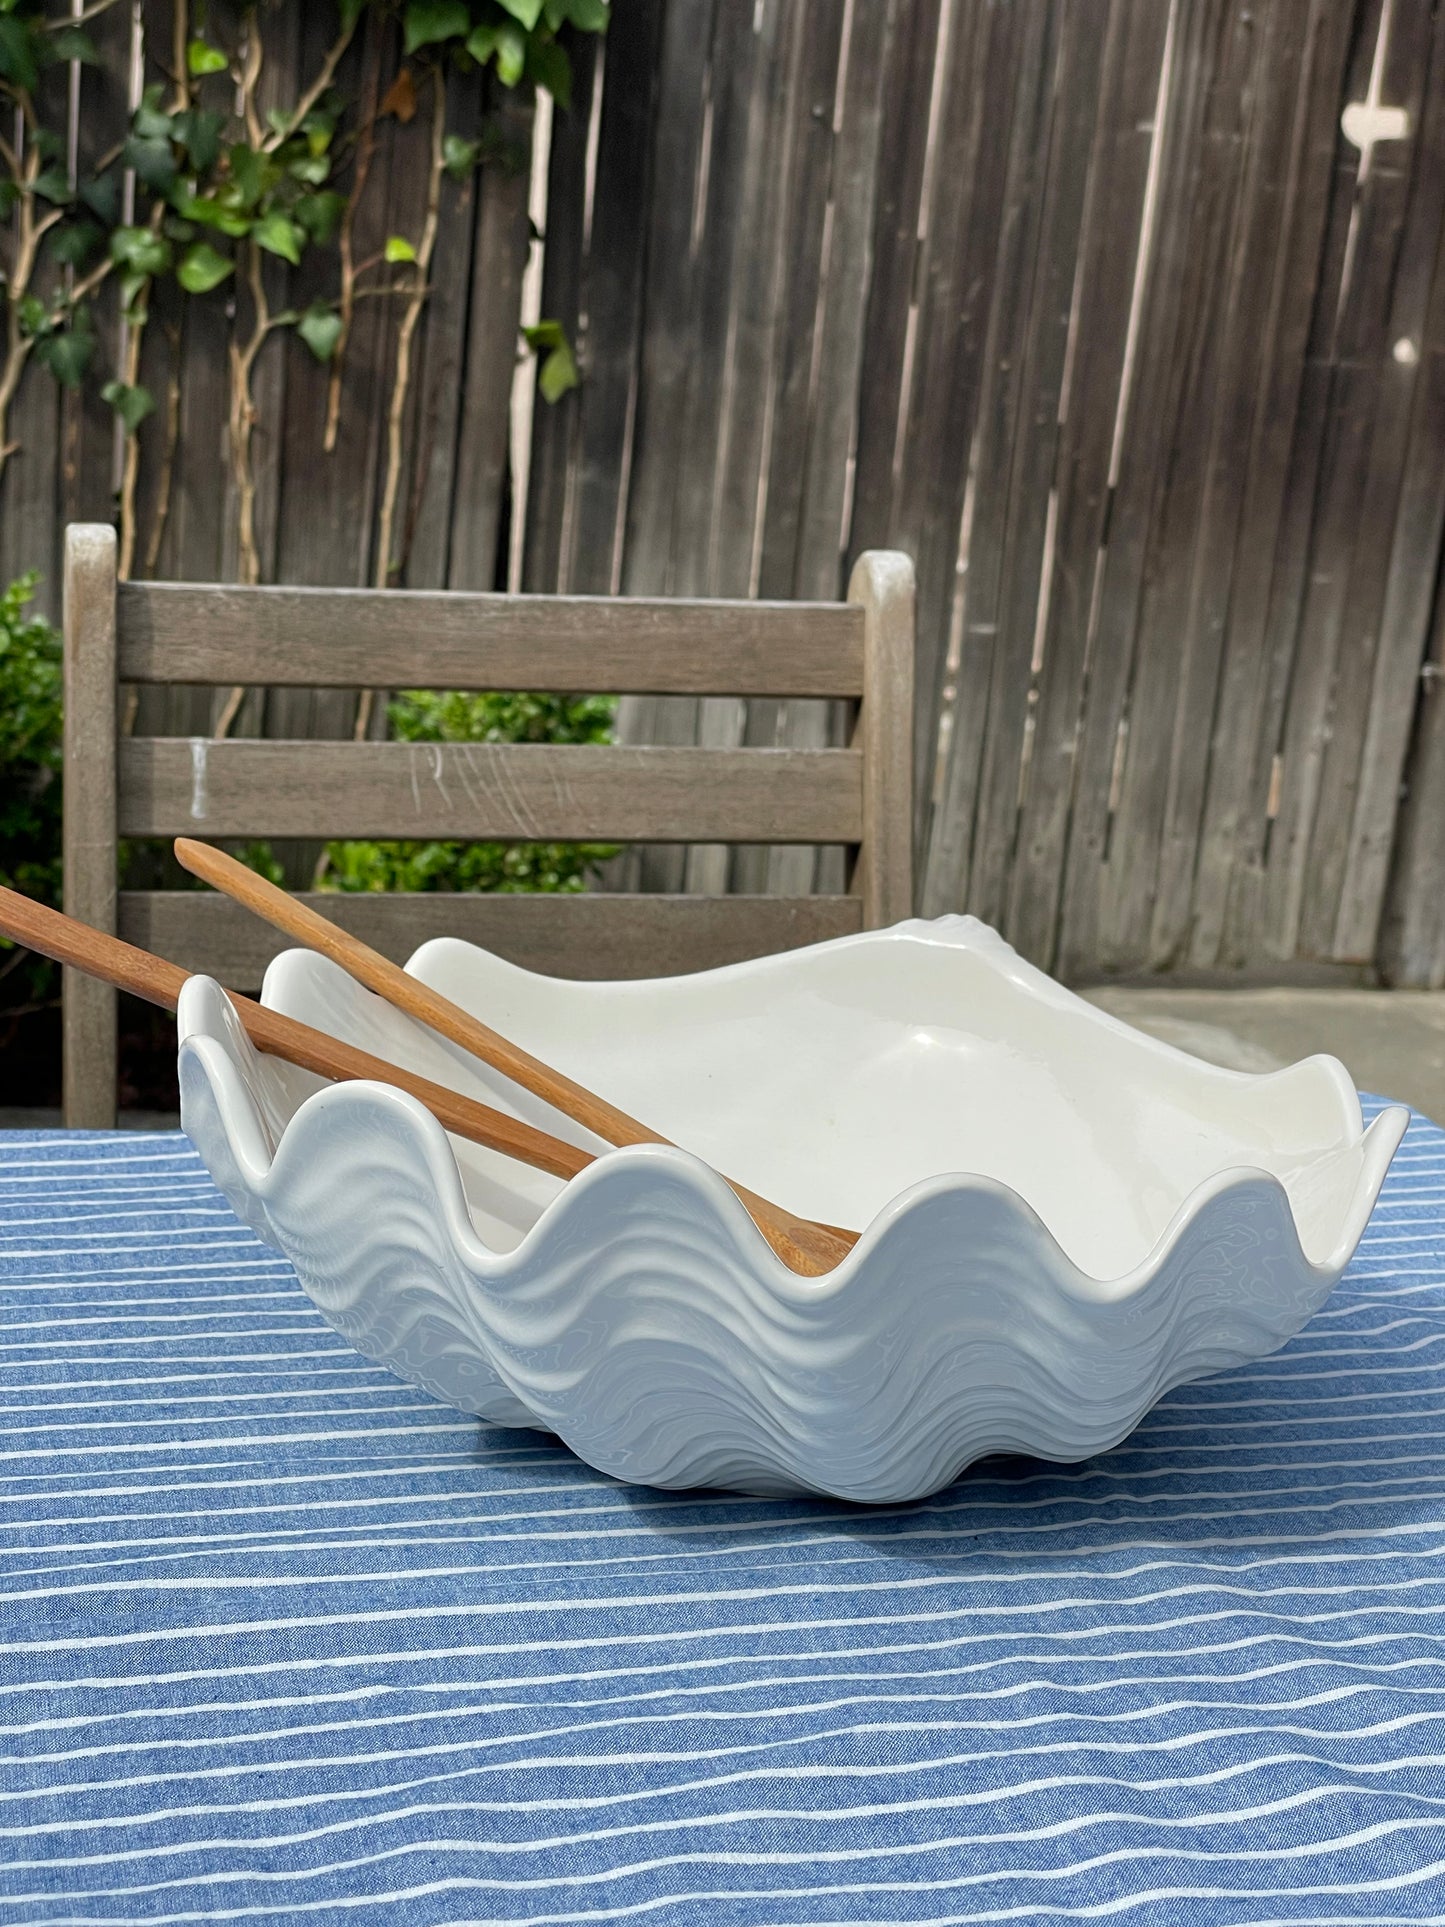 Seaside Clamshell Serving Dish